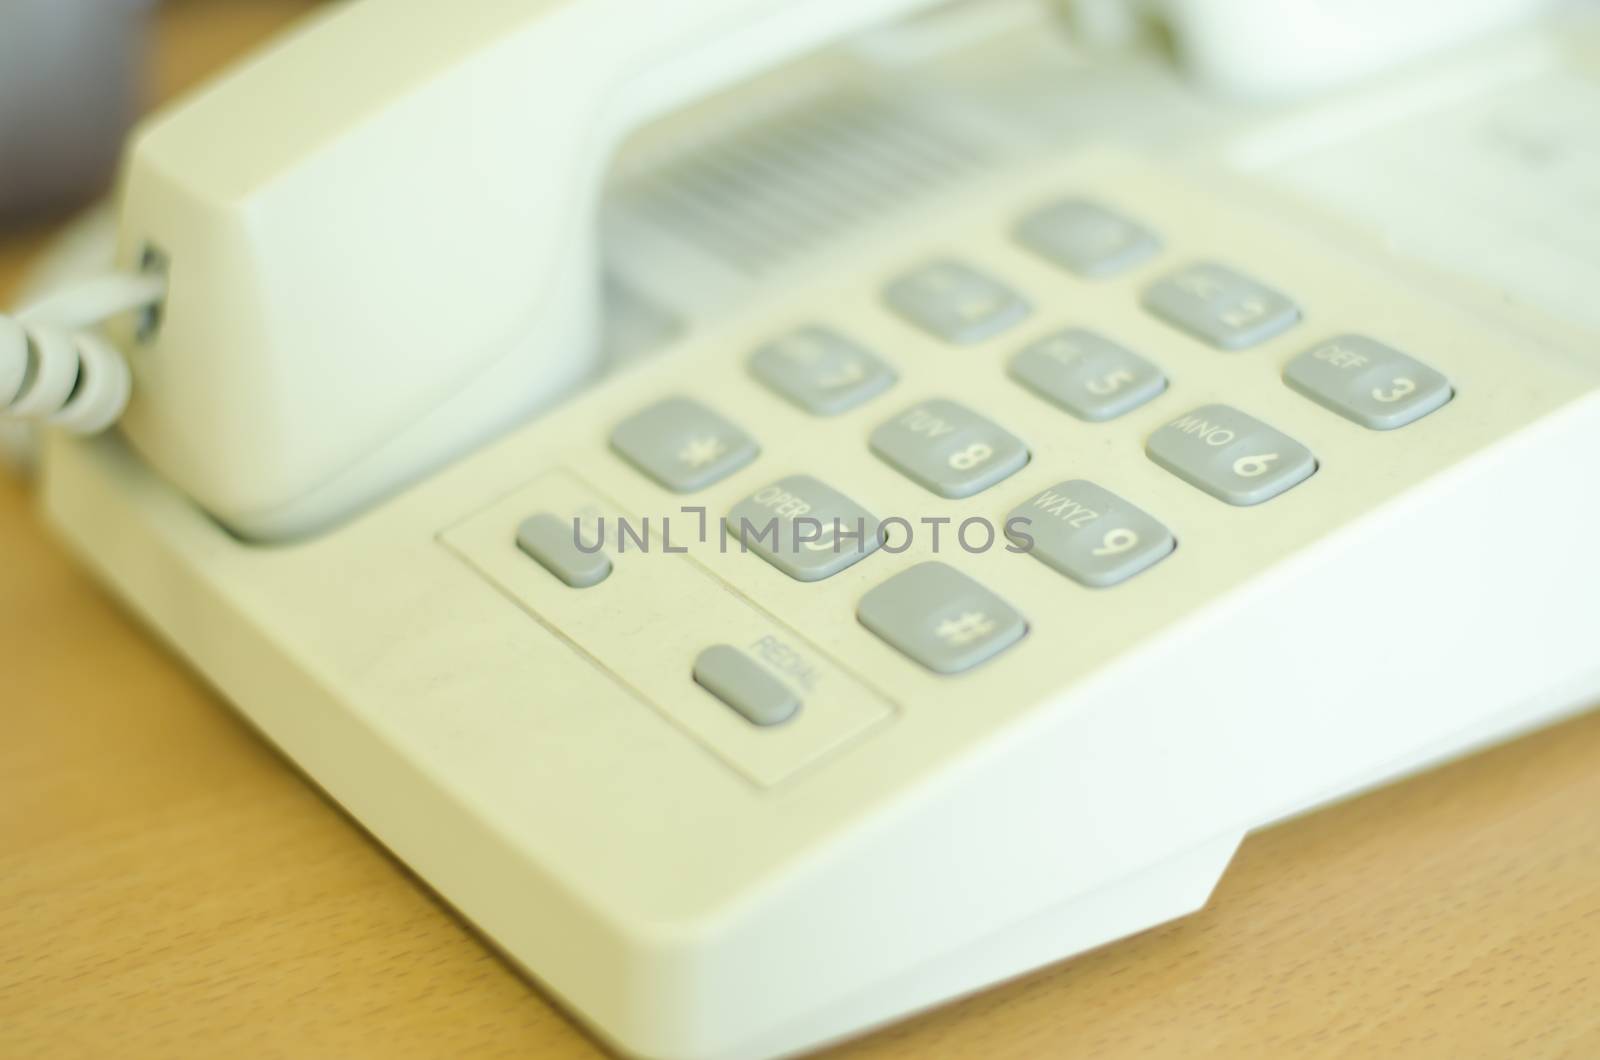 telephone in office can see in many public office